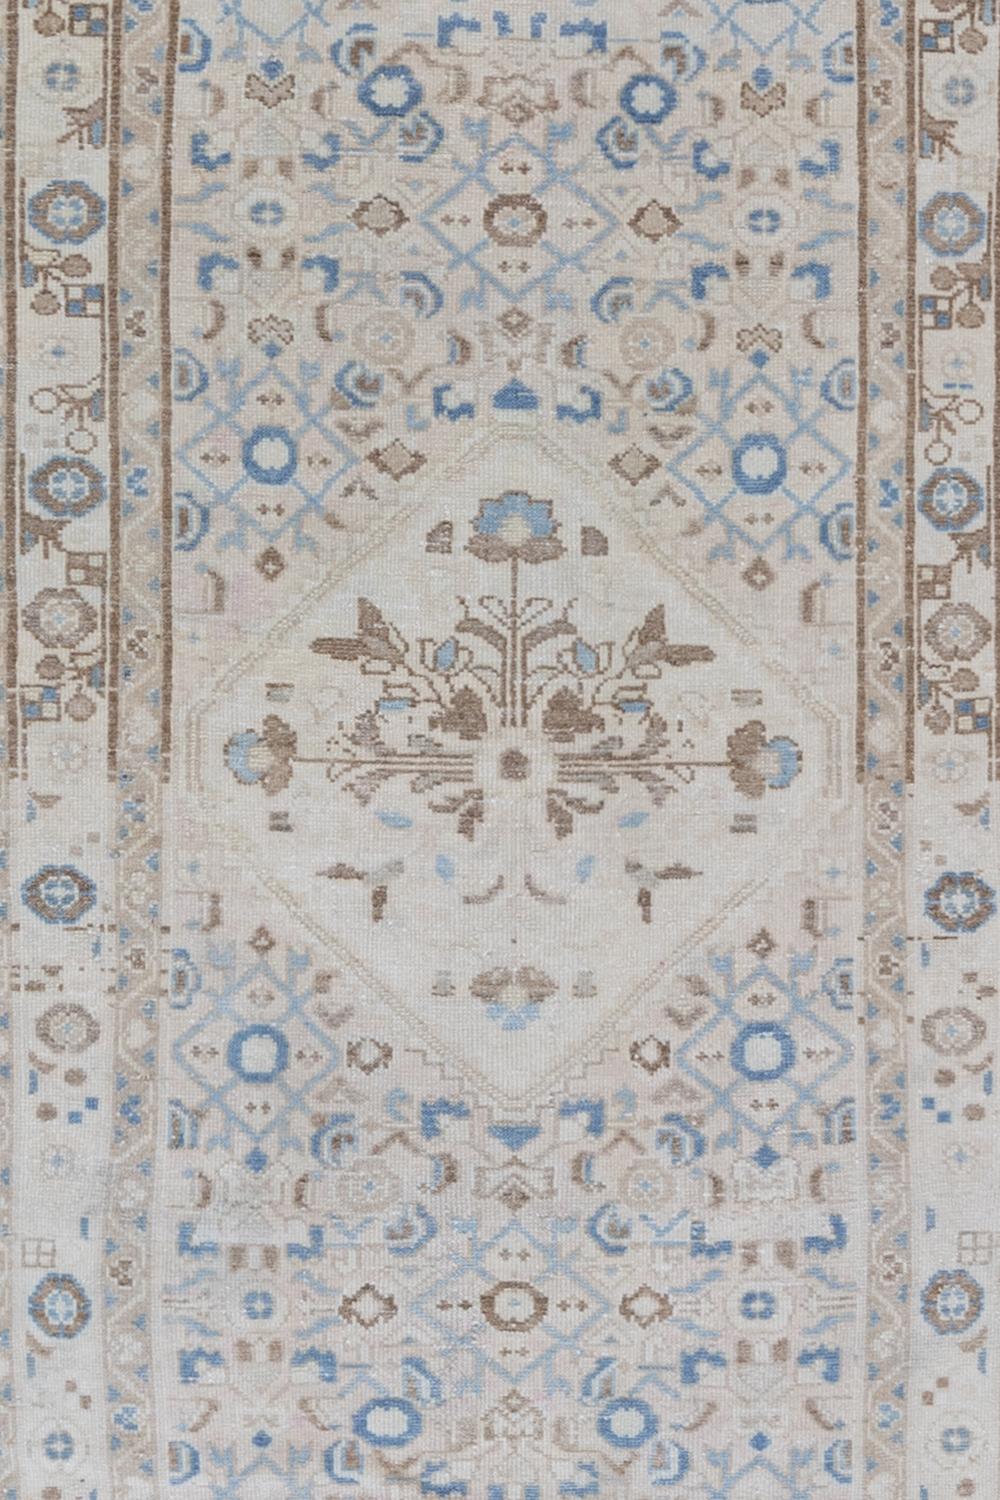 Age: Circa 1940

Colors: ivory, cream, tan, blue

Pile: low

Wear Notes: 2

Material: wool on cotton

Vintage Persian runner woven in the middle of the century. Safe for high traffic areas. 

Vintage and antique rugs are by nature,